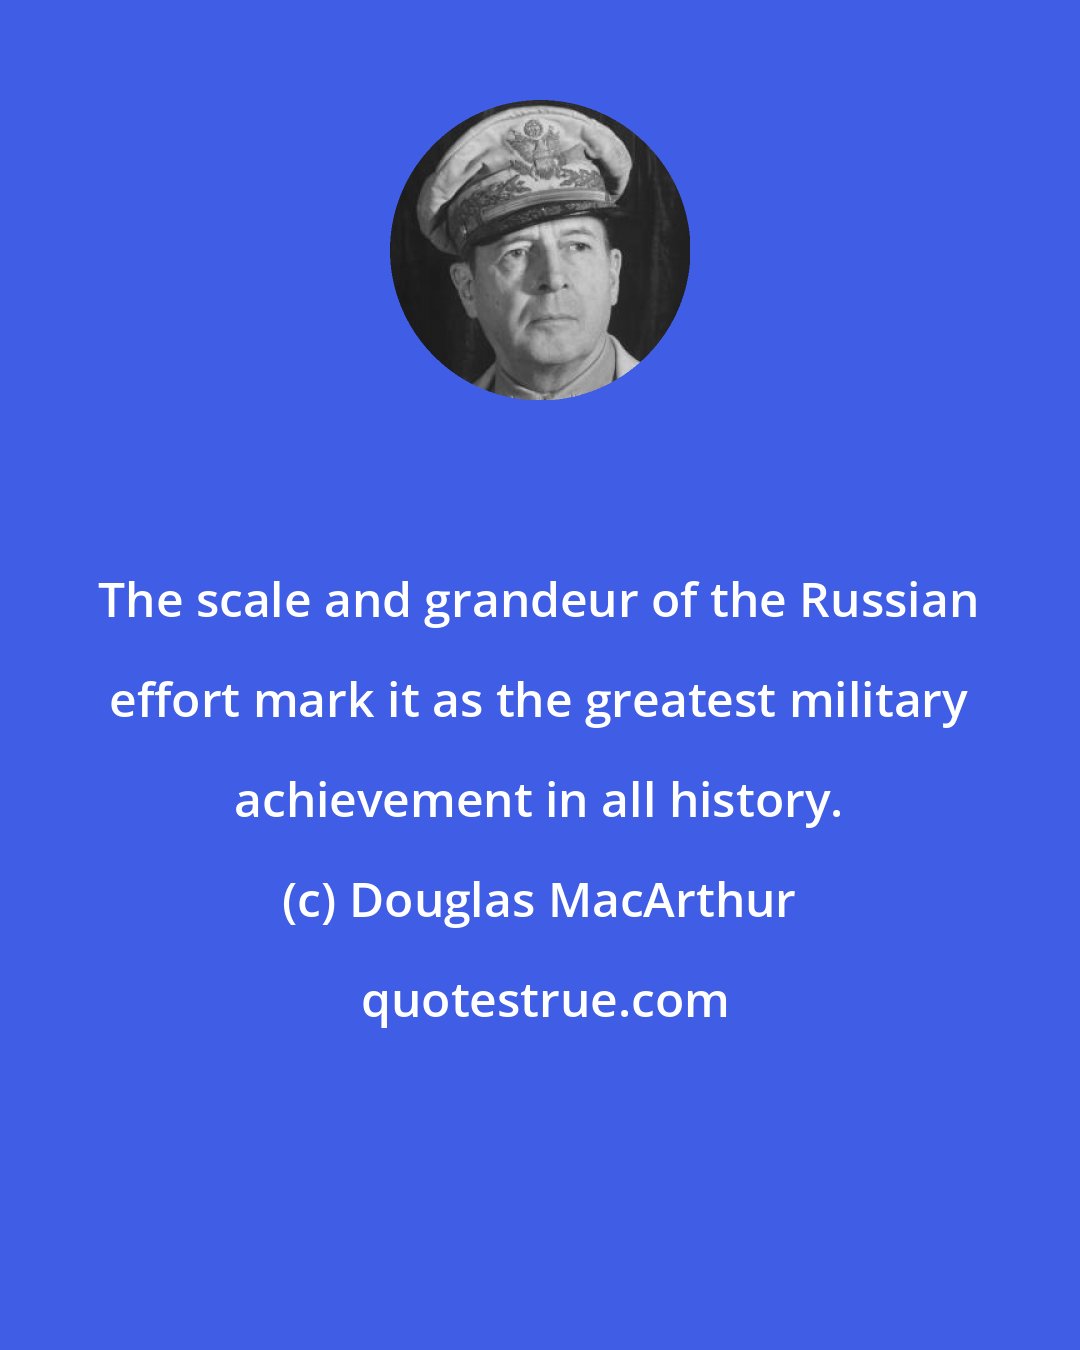 Douglas MacArthur: The scale and grandeur of the Russian effort mark it as the greatest military achievement in all history.